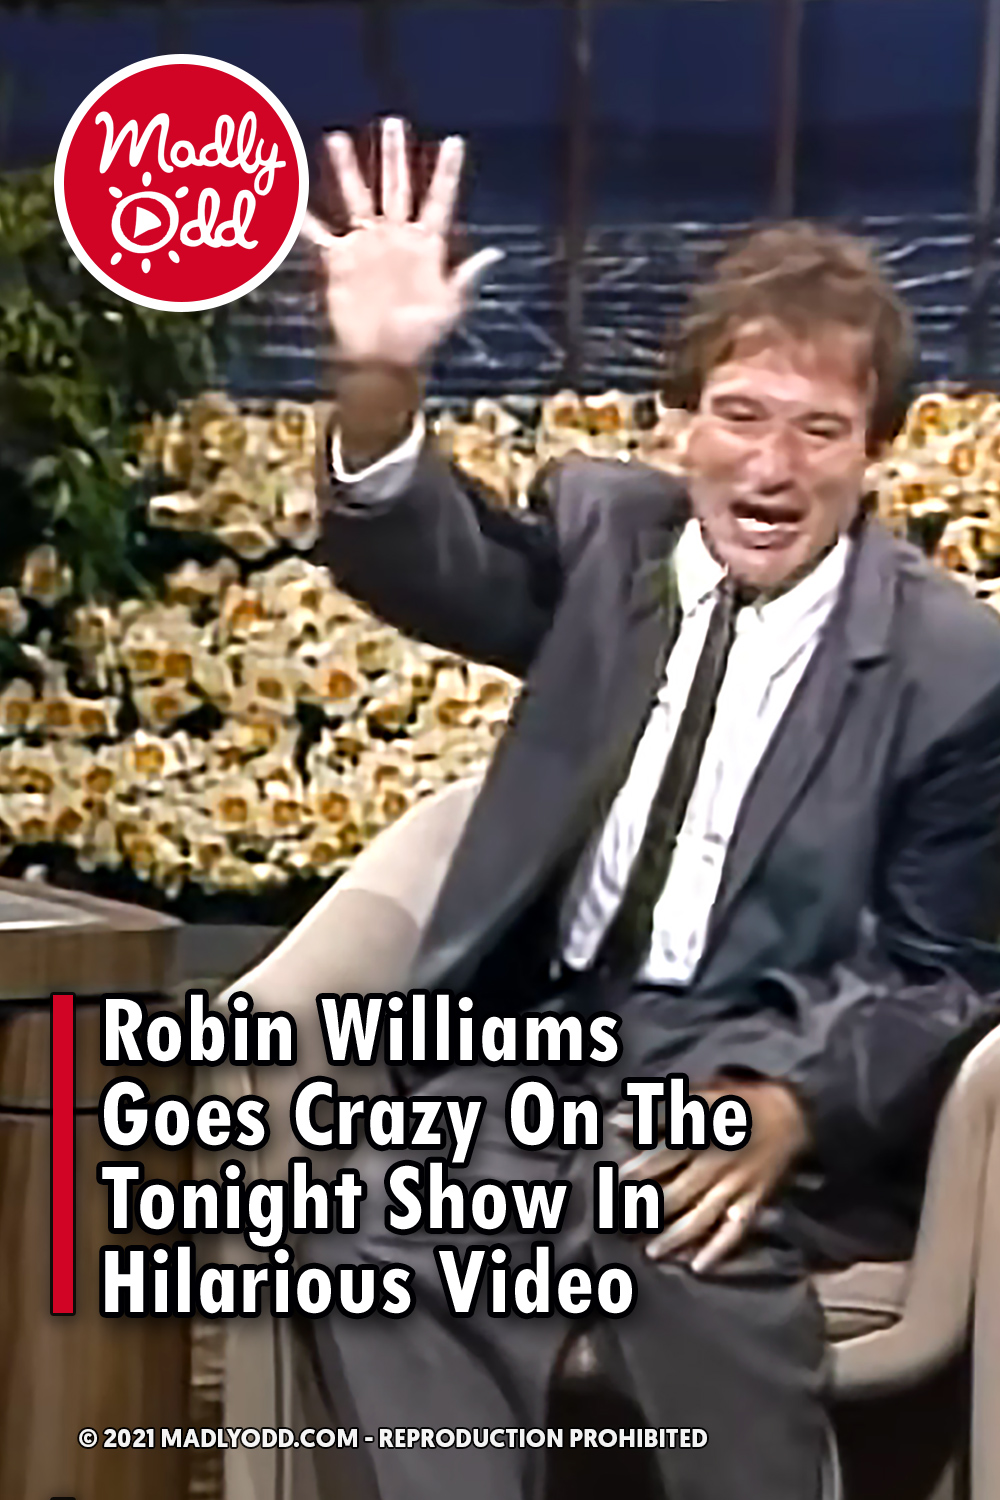 Robin Williams Goes Crazy On The Tonight Show In Hilarious Video